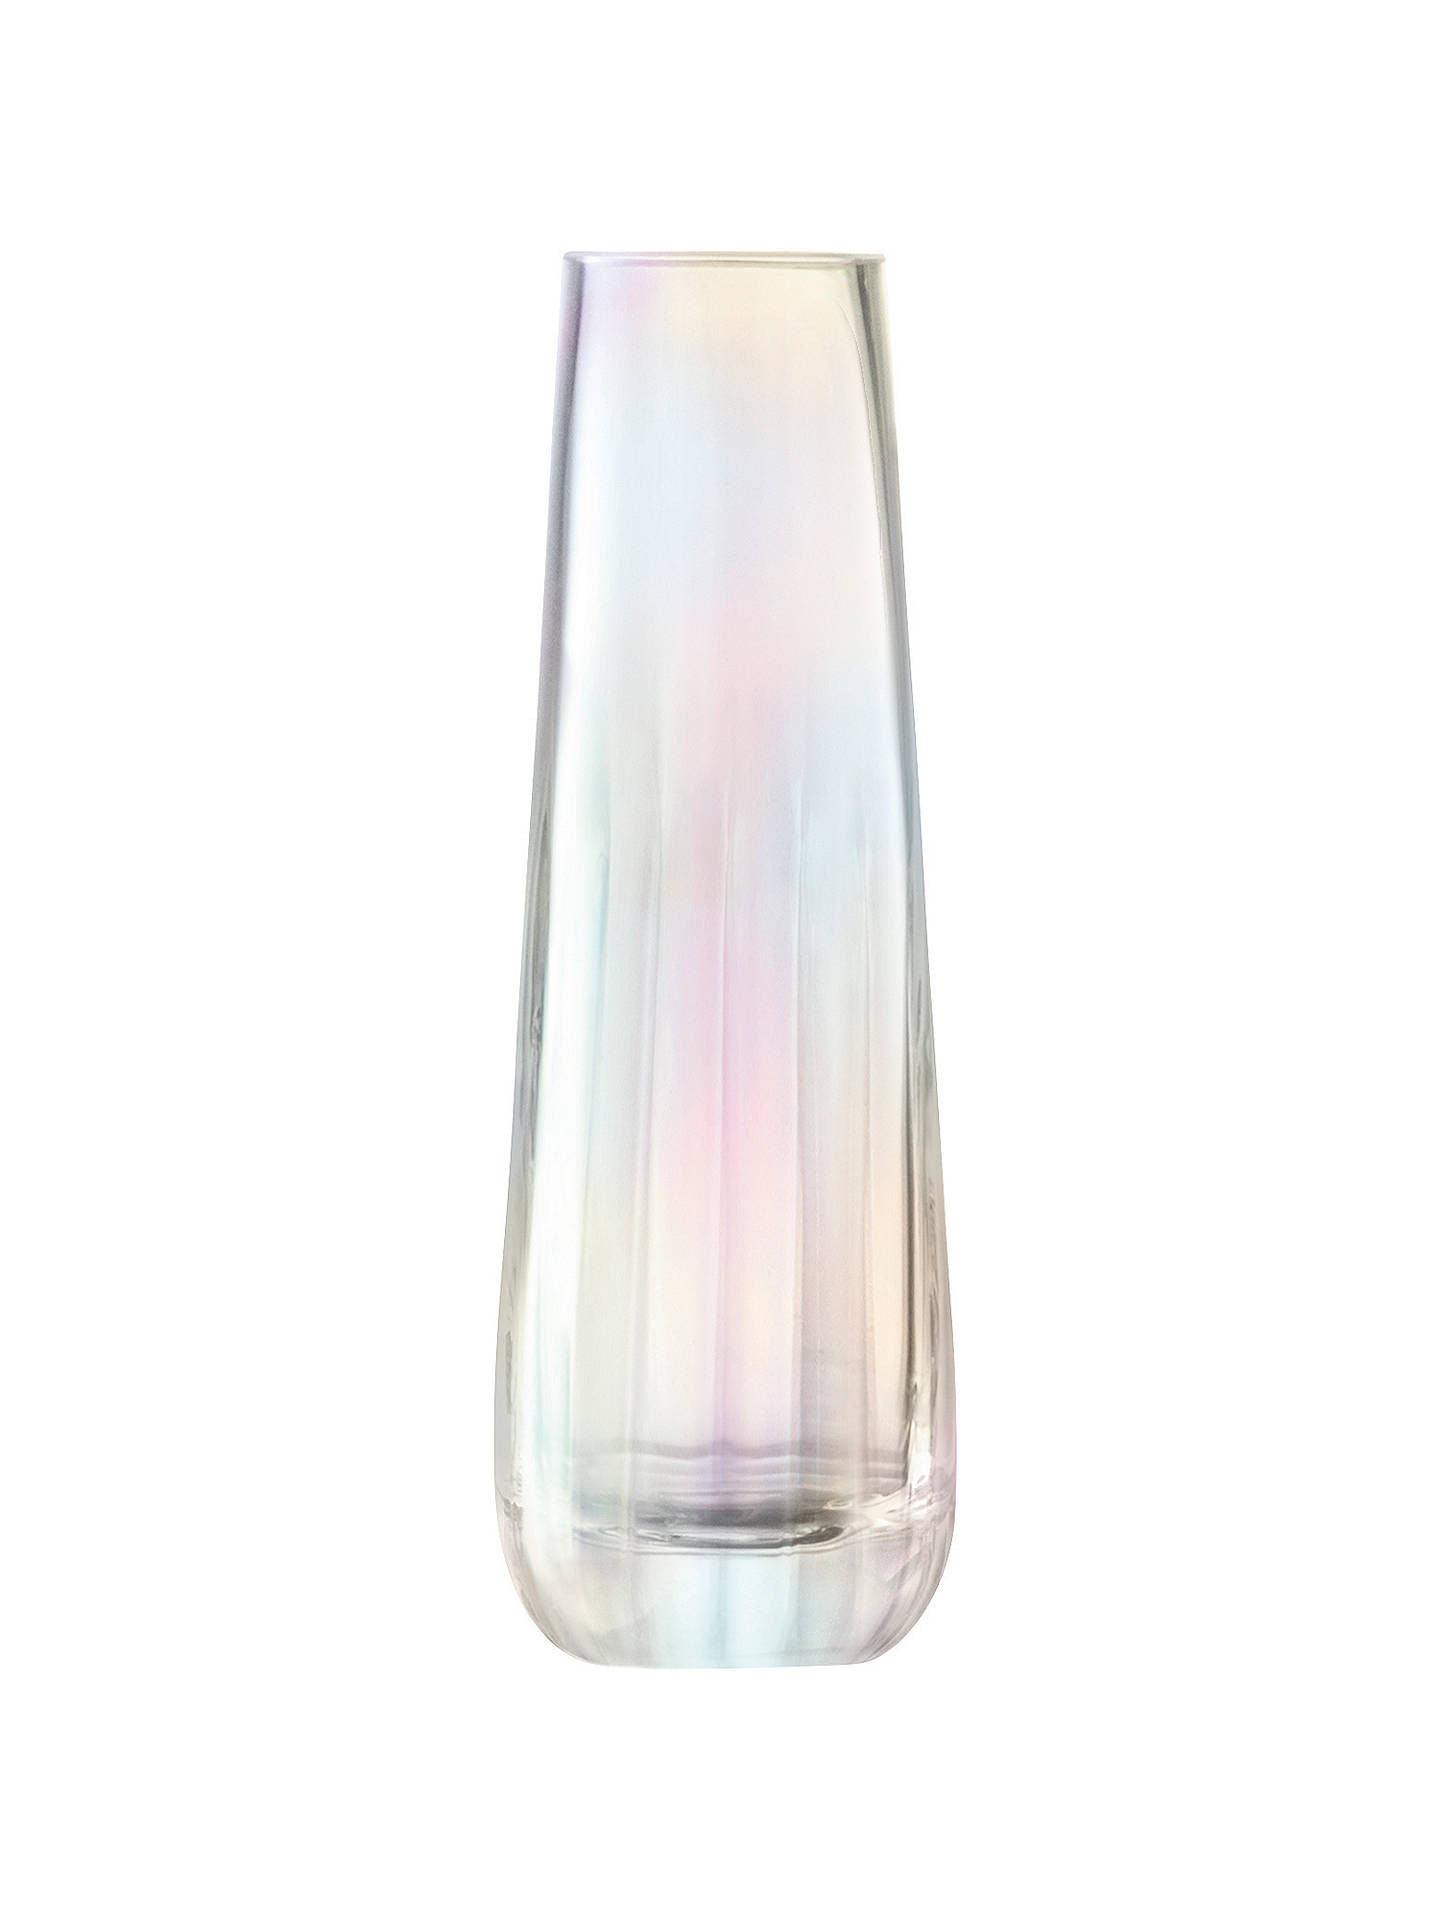 26 Spectacular Test Tube Bud Vase 2024 free download test tube bud vase of bud vases small glass vases with strong suction cups for t in buylsa international pearl optic bud vase h20cm online at johnlewis com